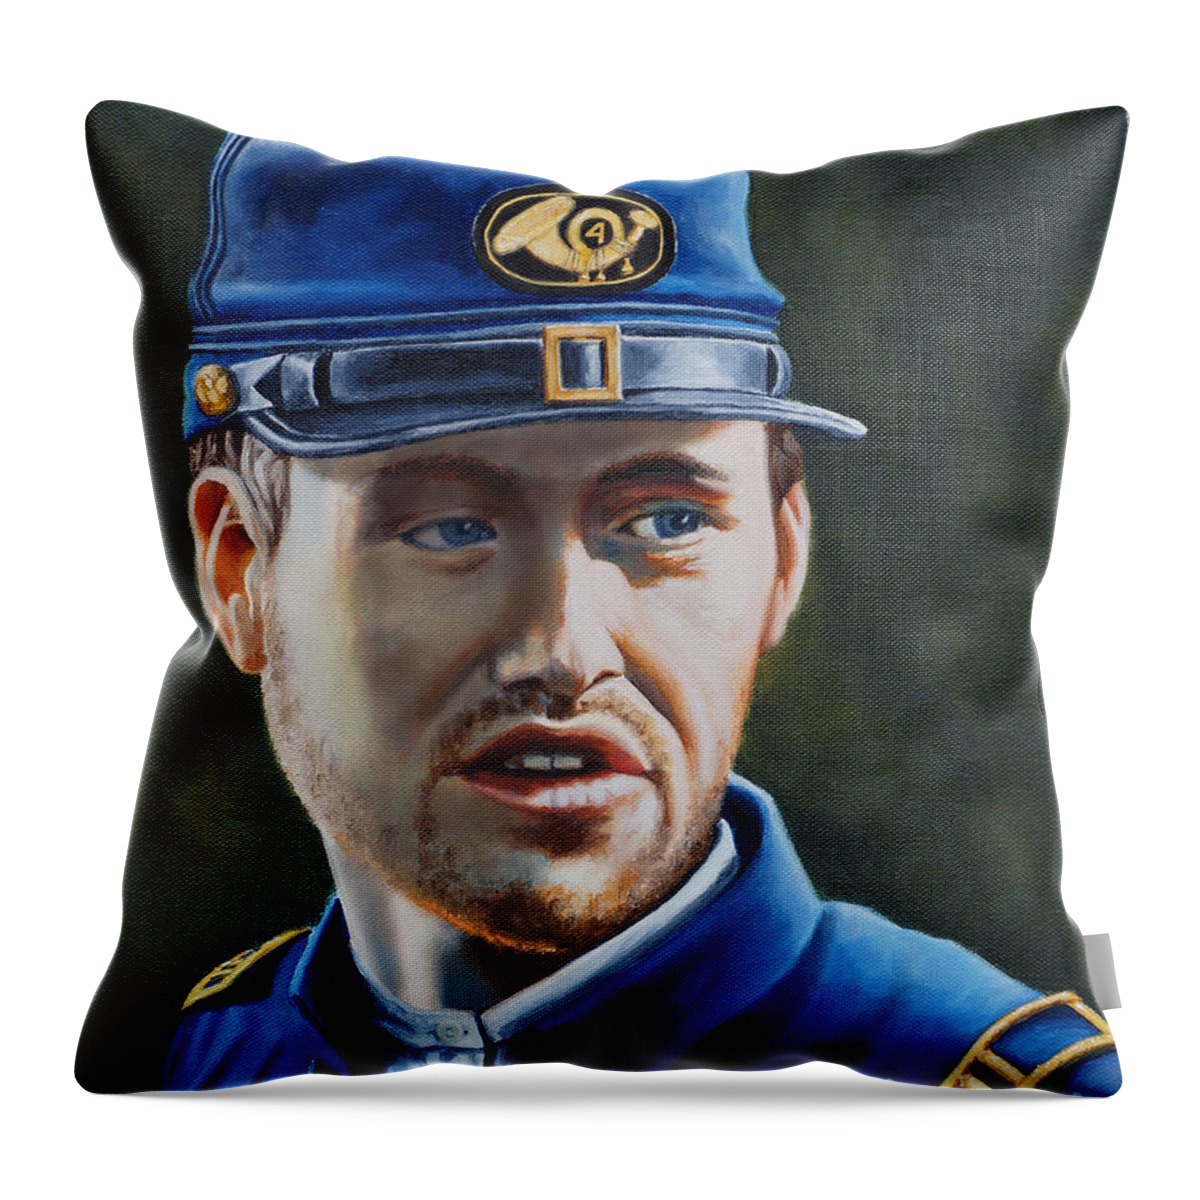 Yankee Throw Pillow featuring the painting Yankee by Ken Kvamme